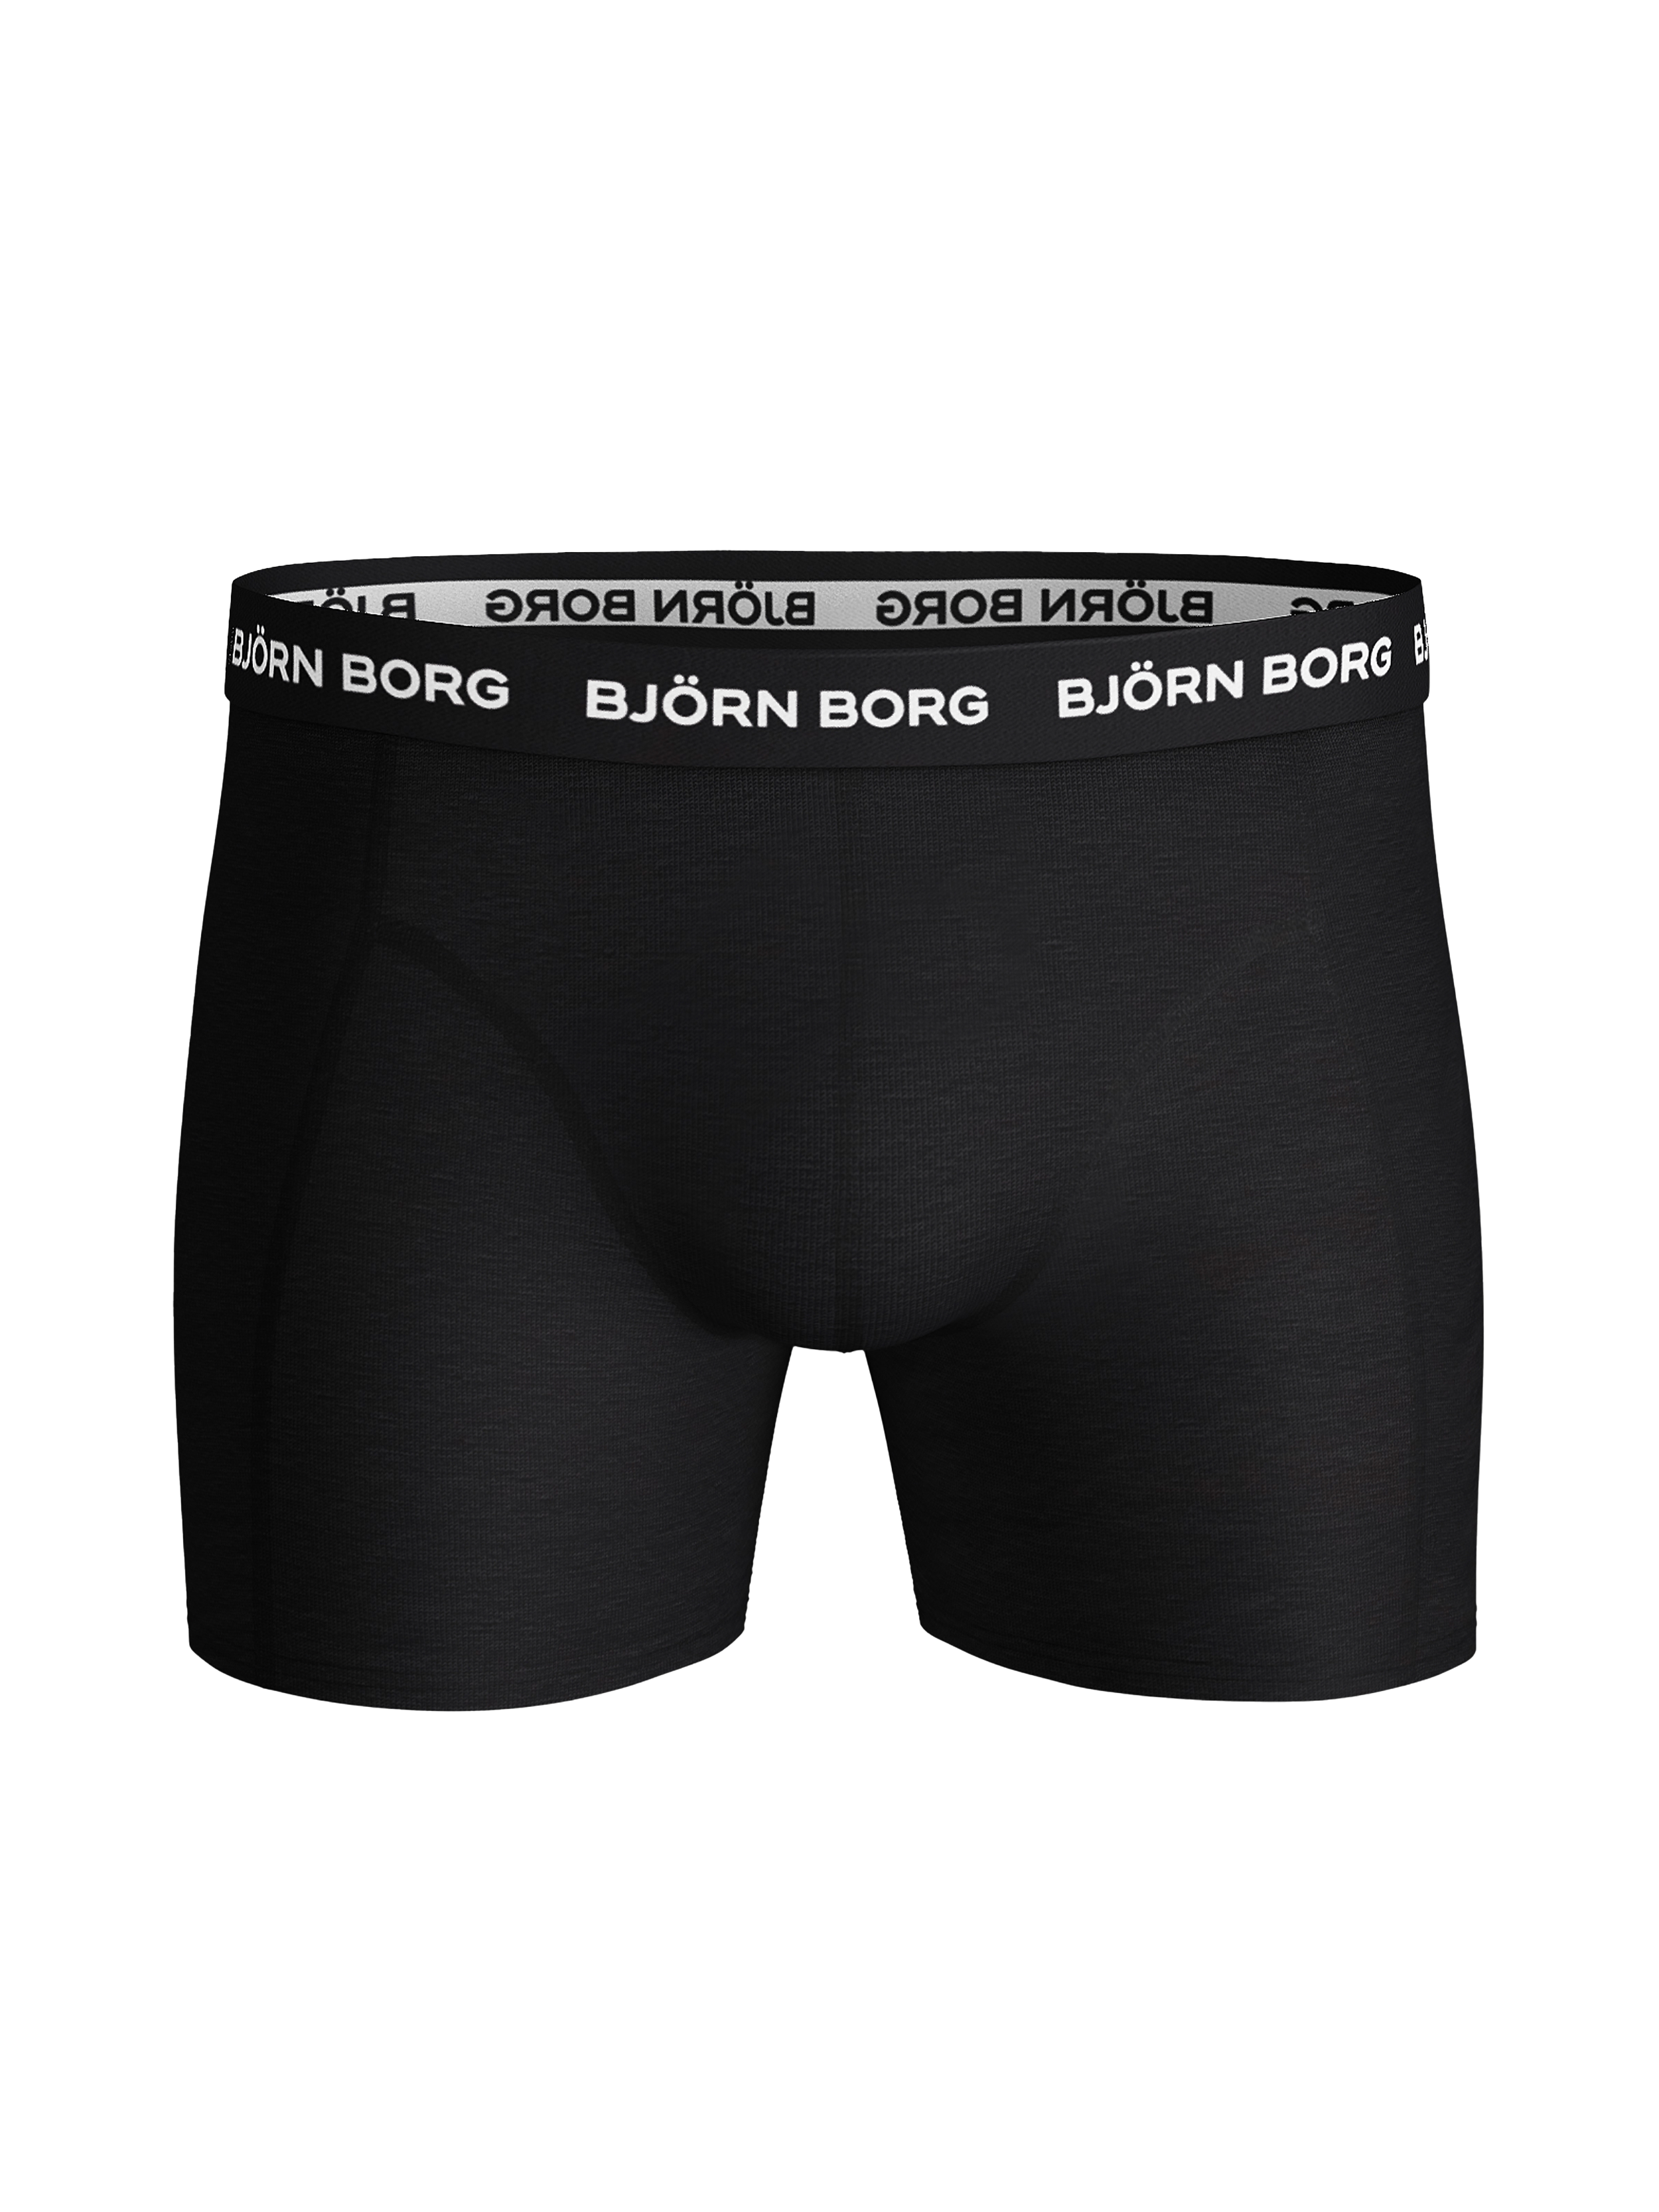 Harry Goodwins for Björn Borg Underwear - Fucking Young!